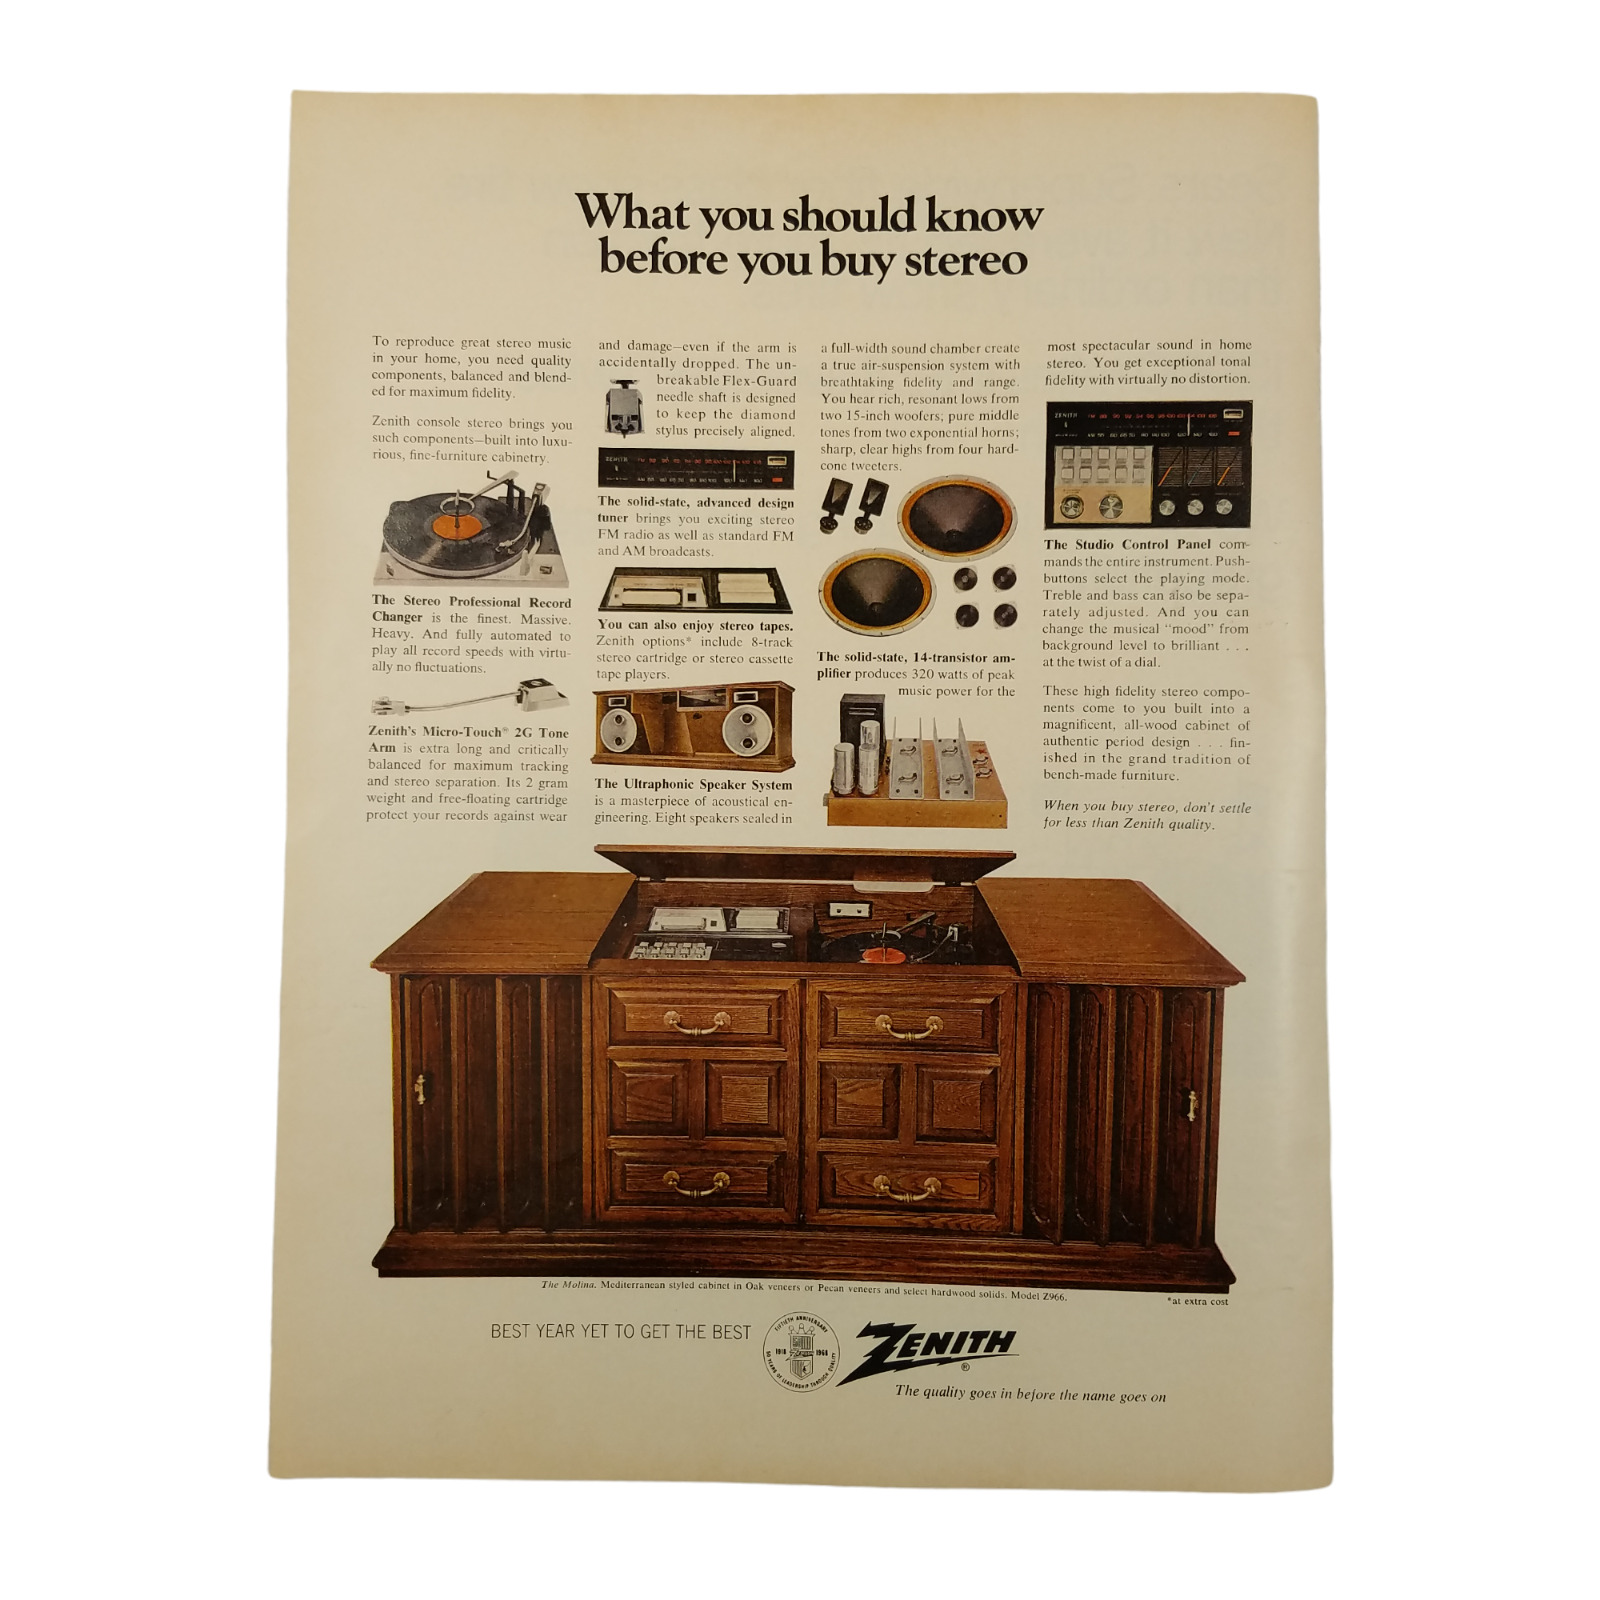 1968 Zenith Console Stereo Vintage Print Ad What You Should Know Before You Buy